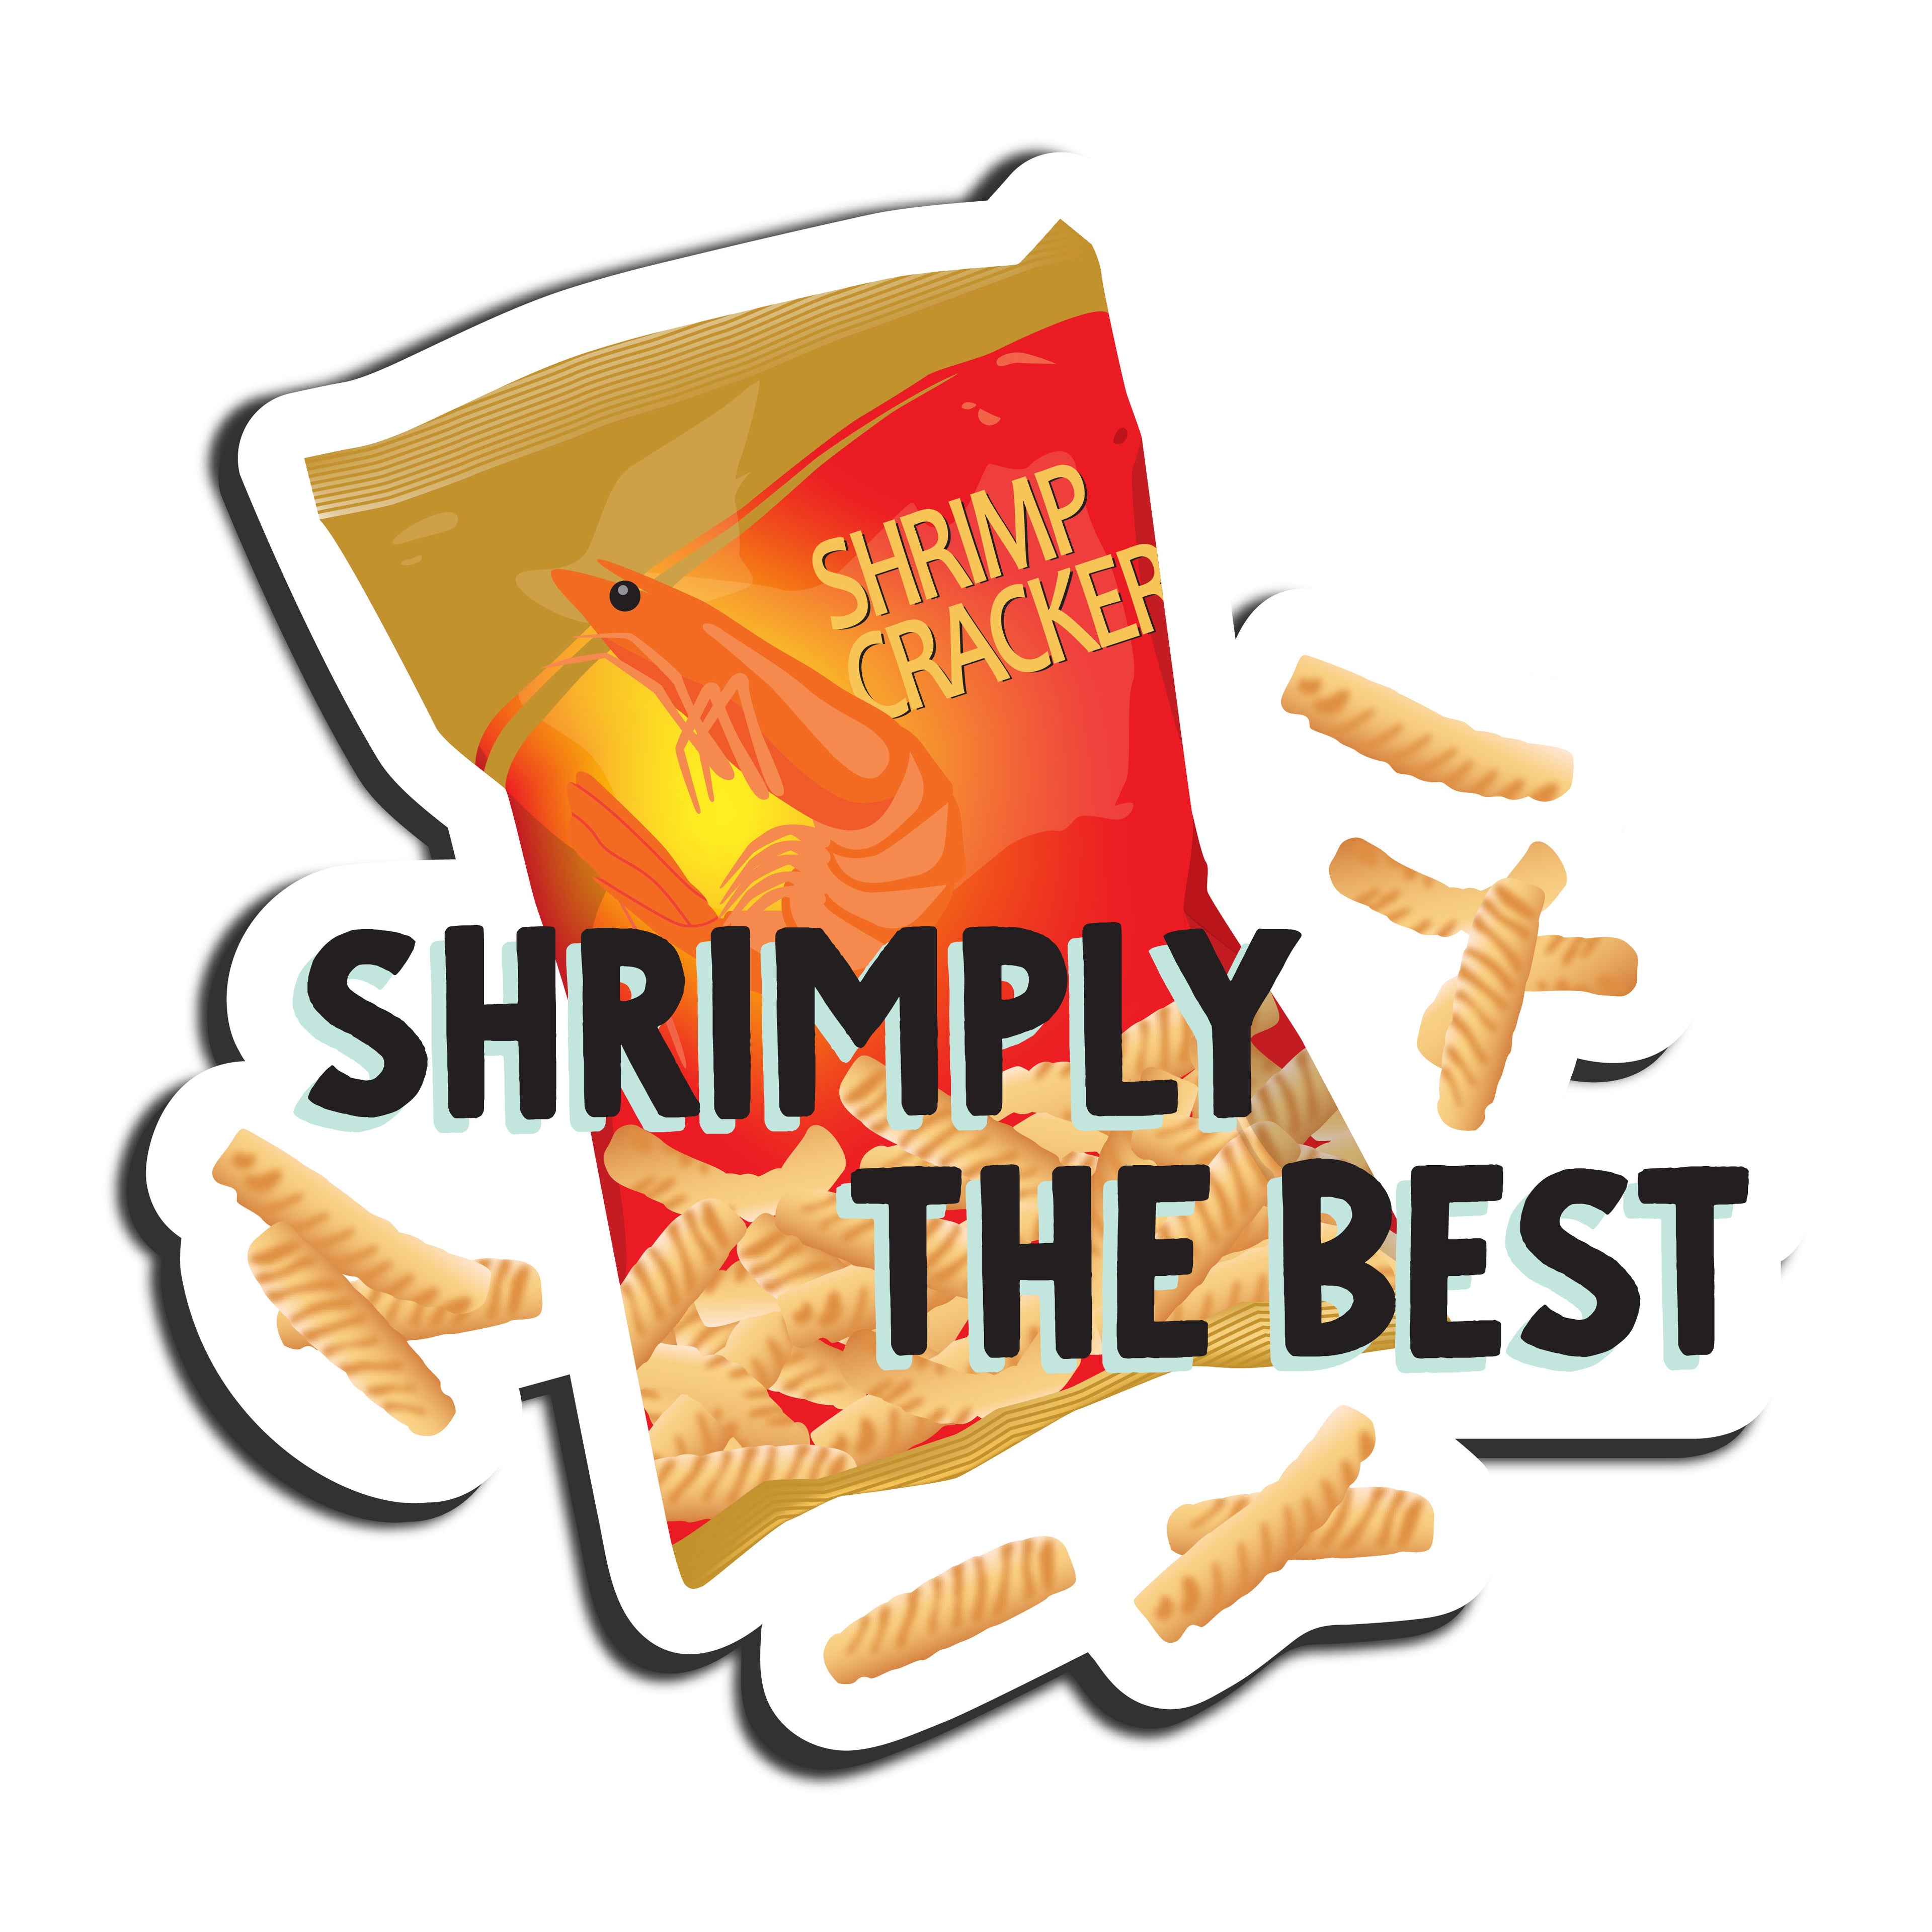 Shrimply the best magnet by I&